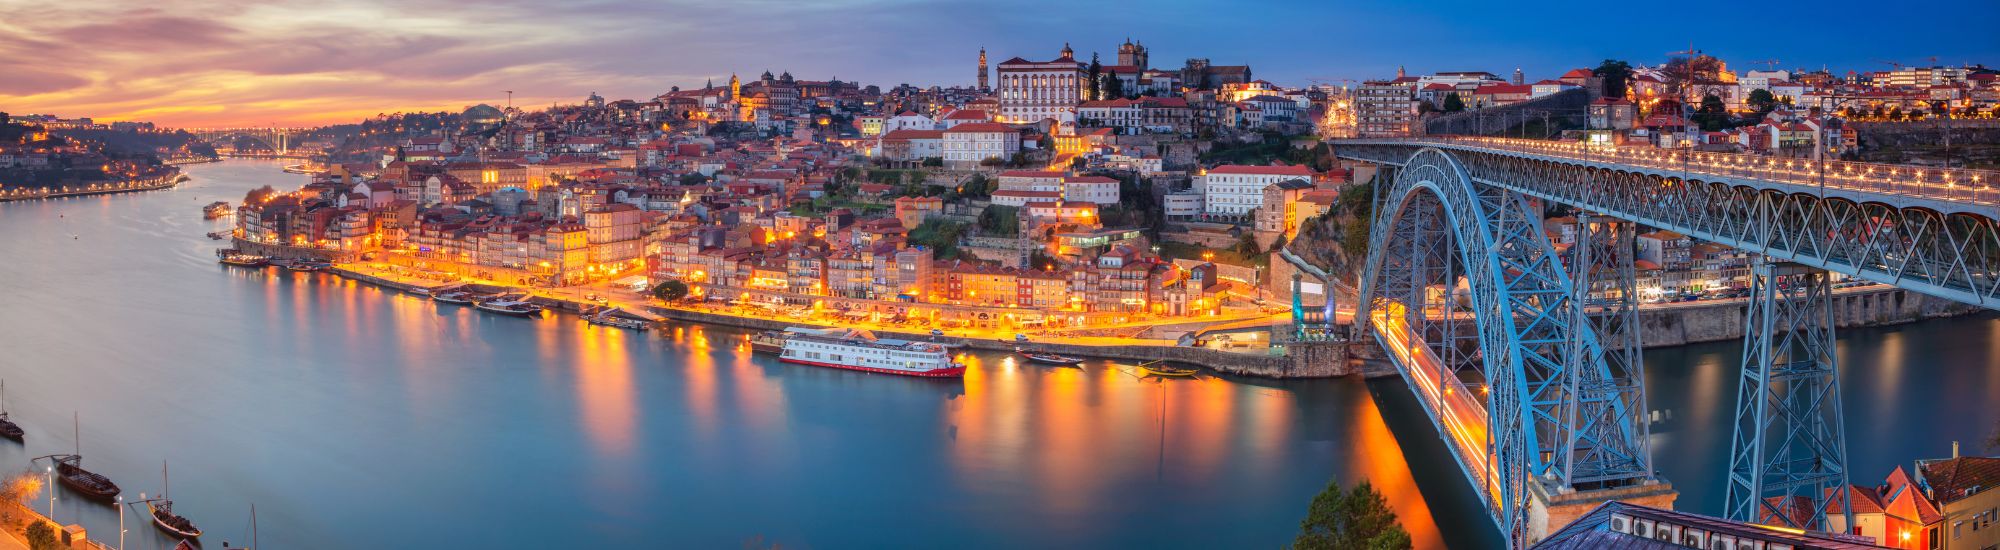 tourhub | Just Go Holidays | Discovering the Douro 